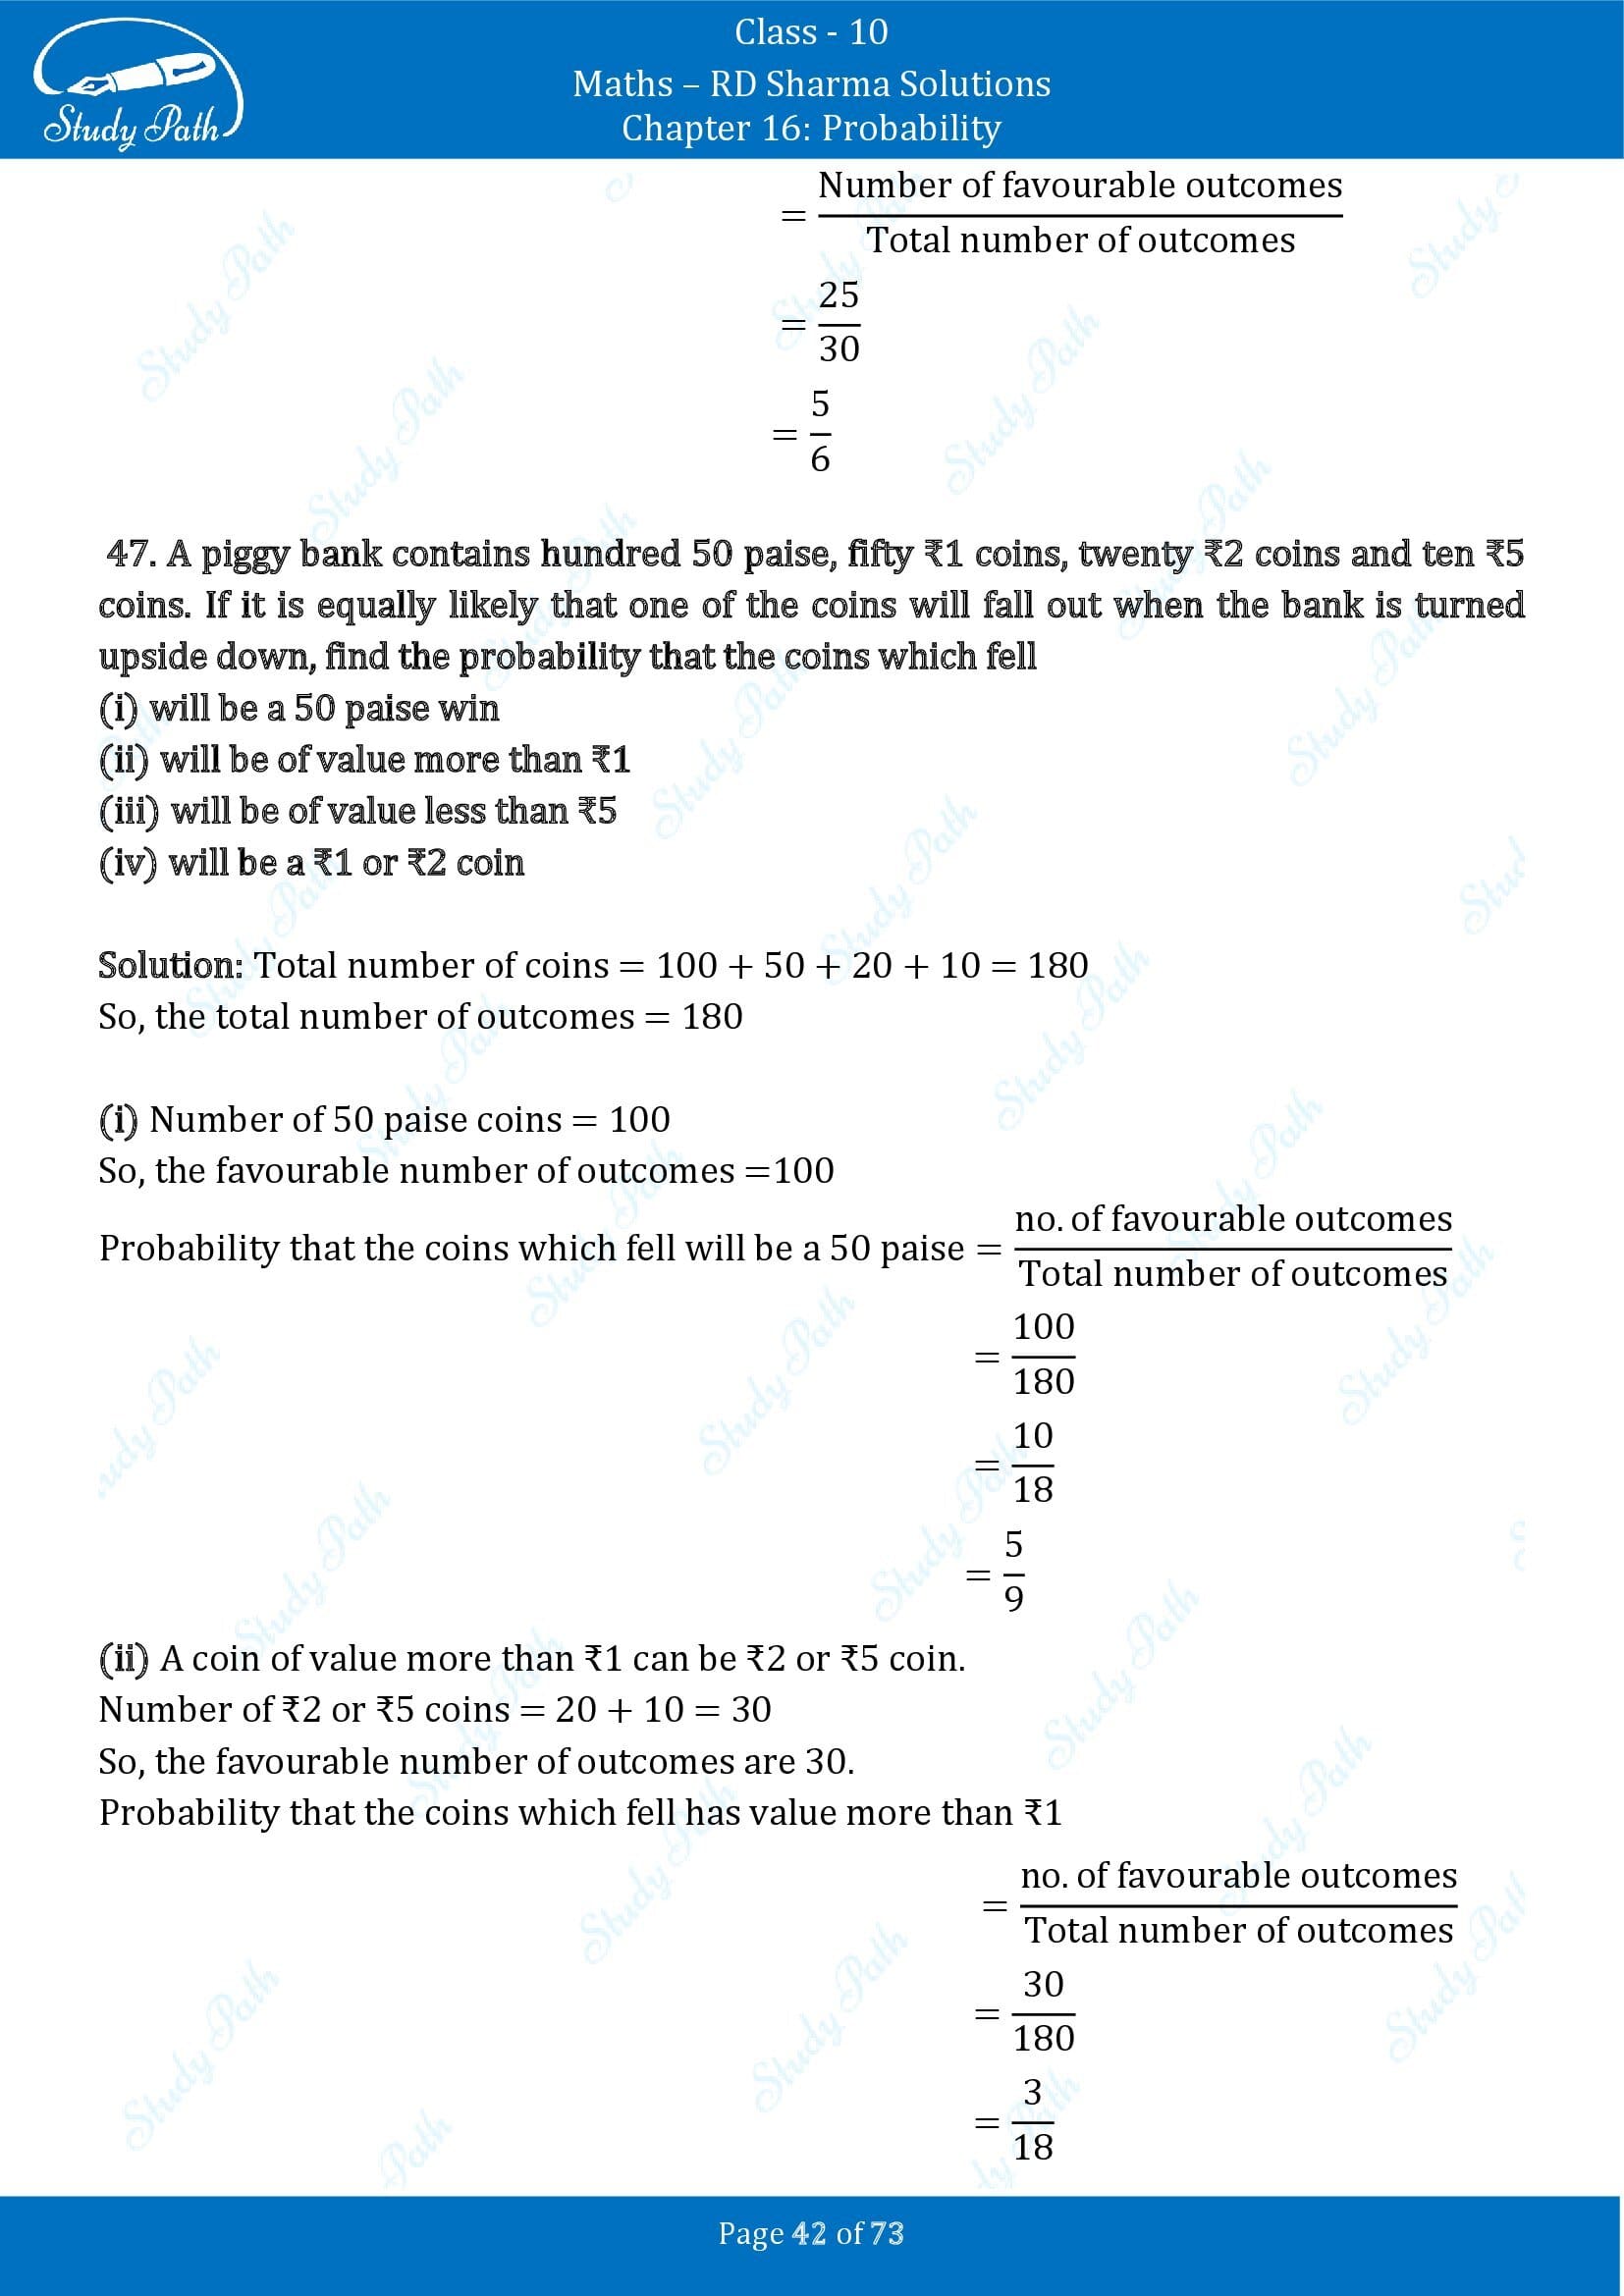 RD Sharma Solutions Class 10 Chapter 16 Probability Exercise 16.1 00042